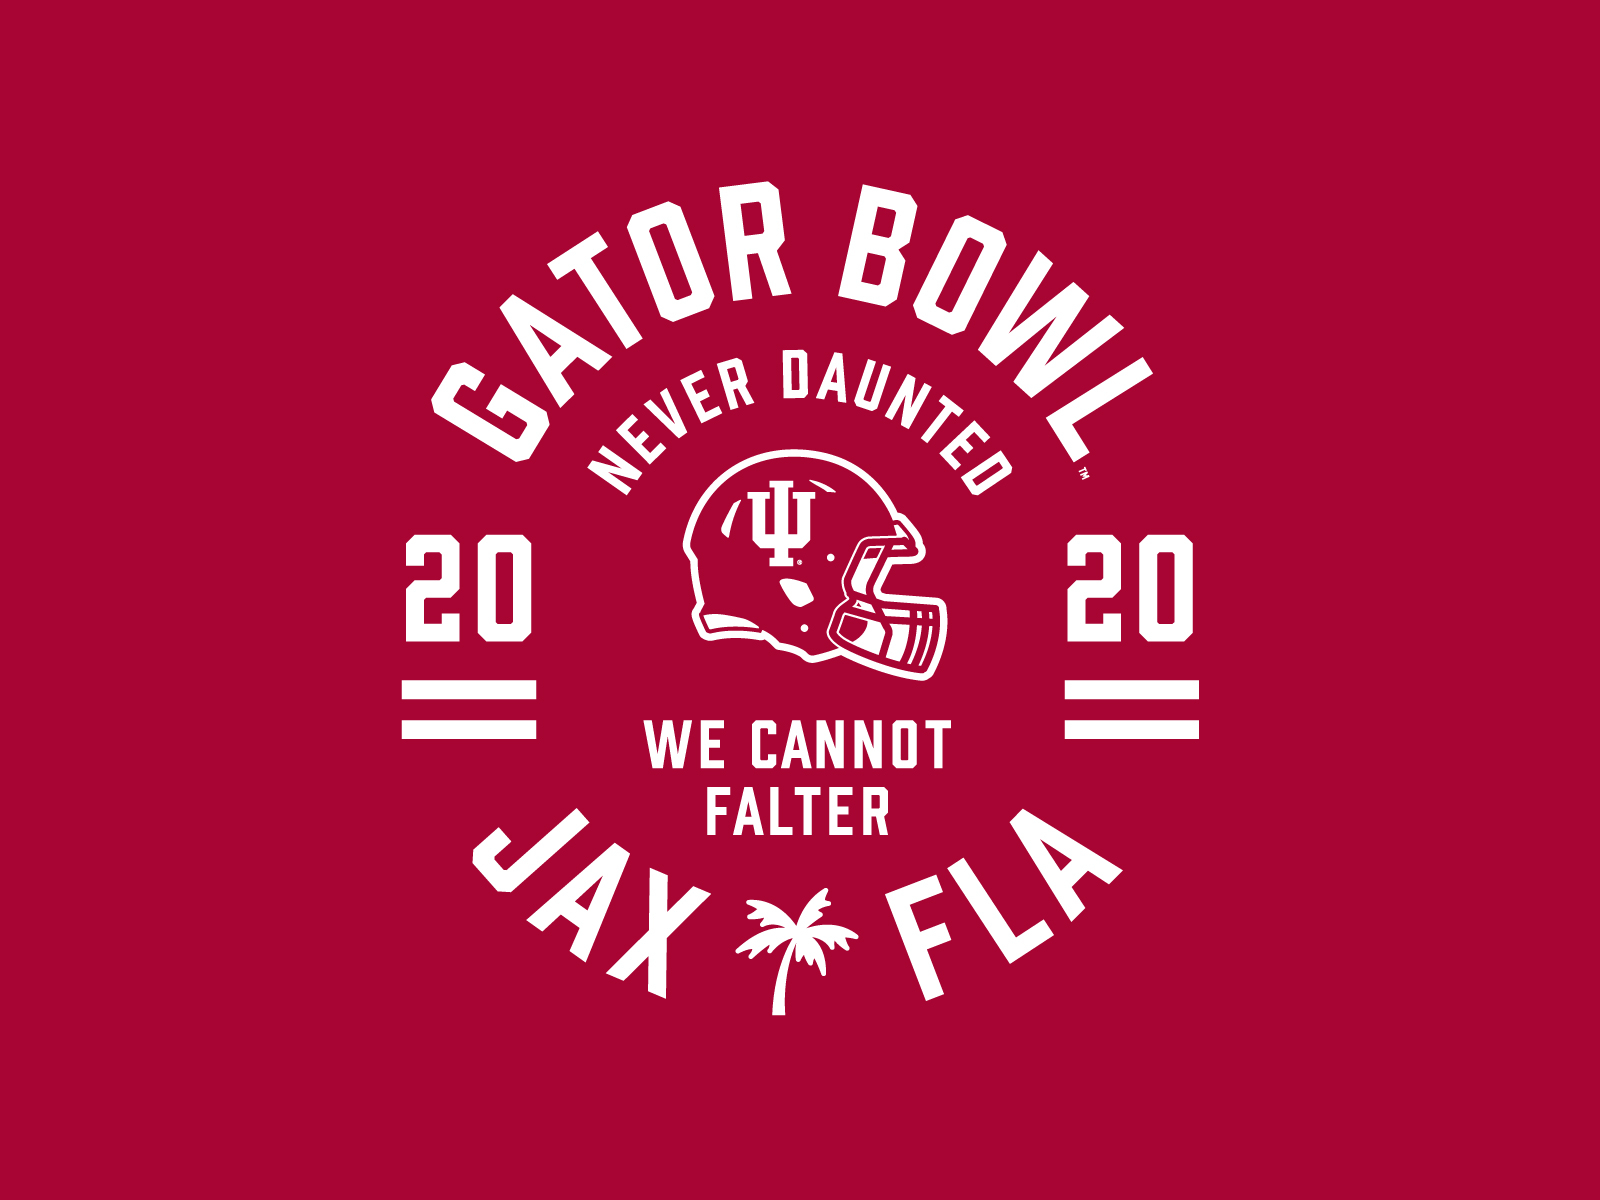 Gator Bowl by Kevin Spahn on Dribbble